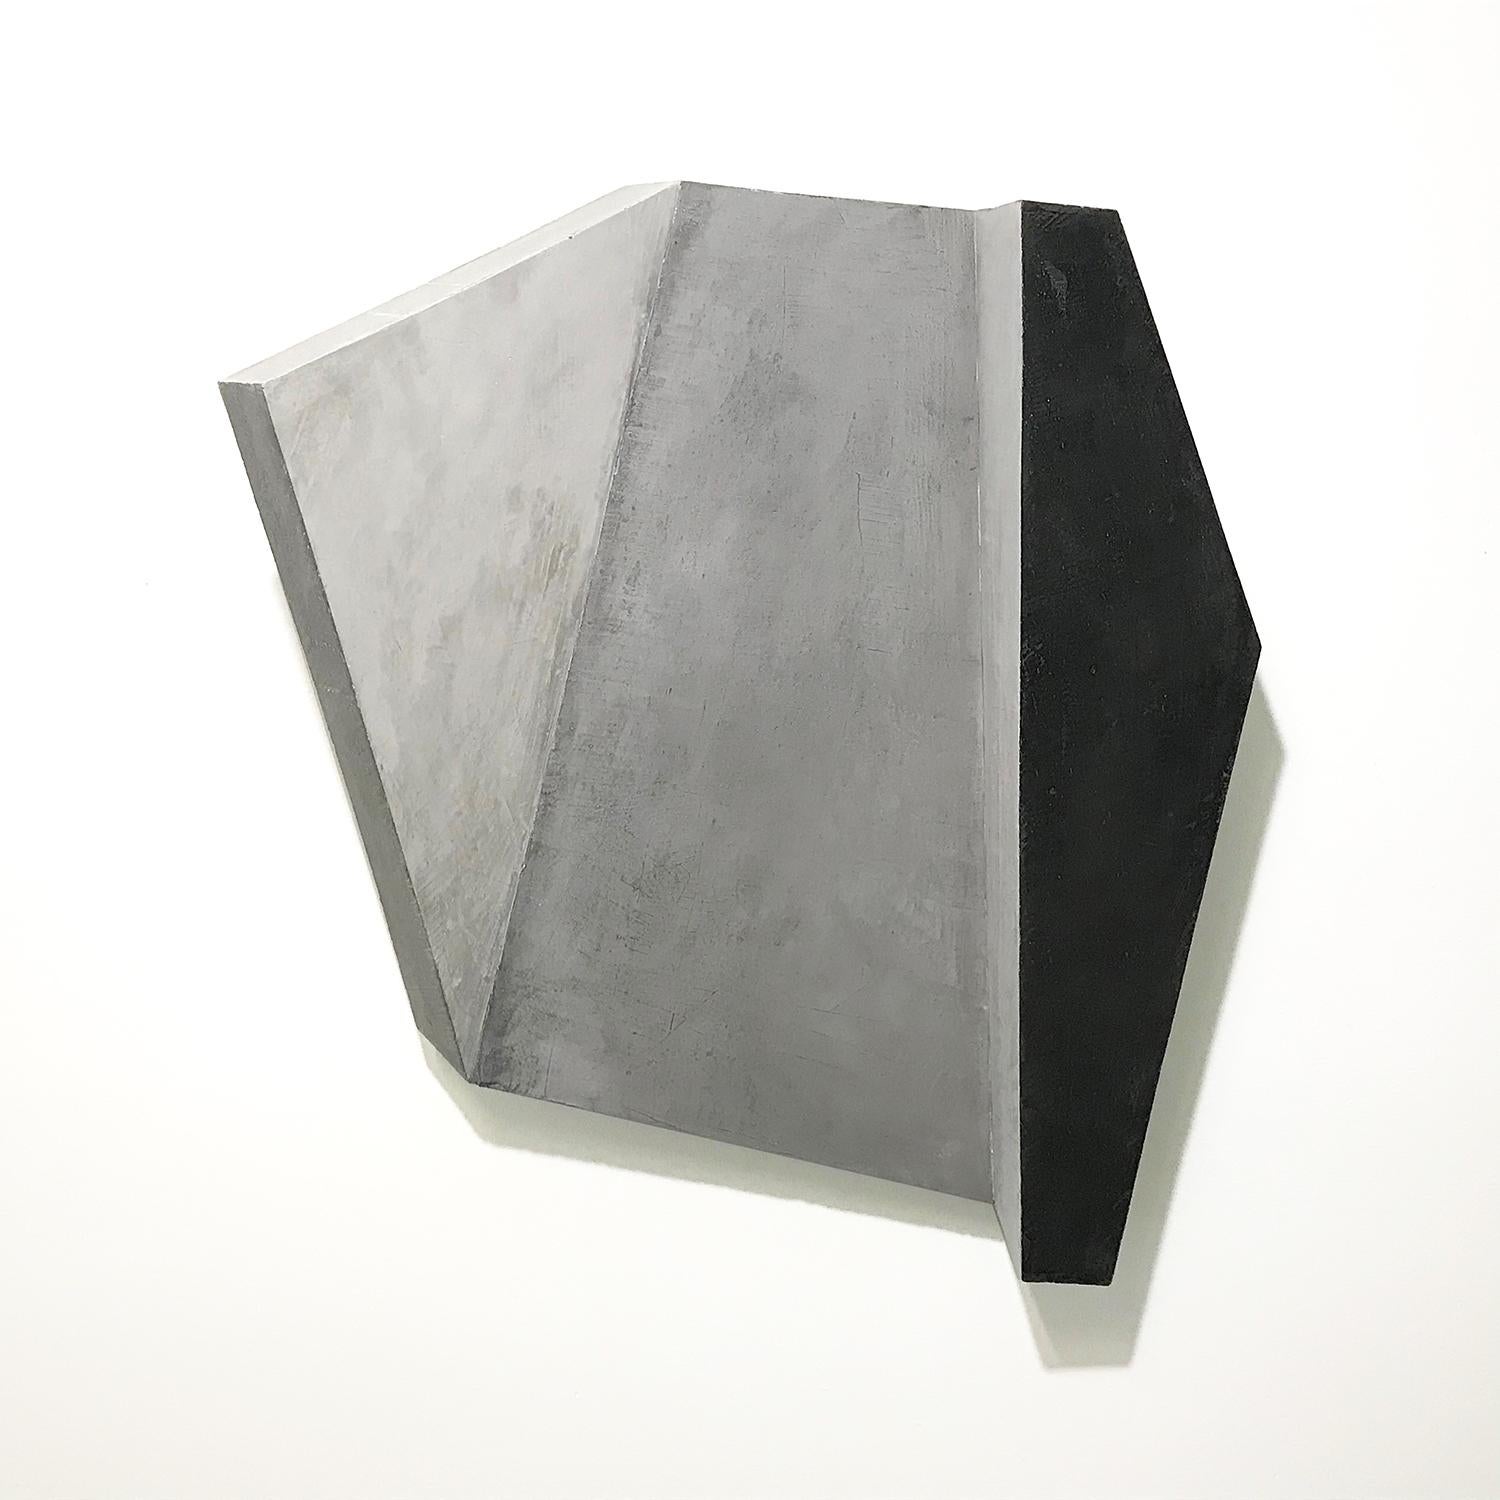 Please Leave Us Alone (Abstract Minimalist Light Grey 3-D Wall Sculpture)